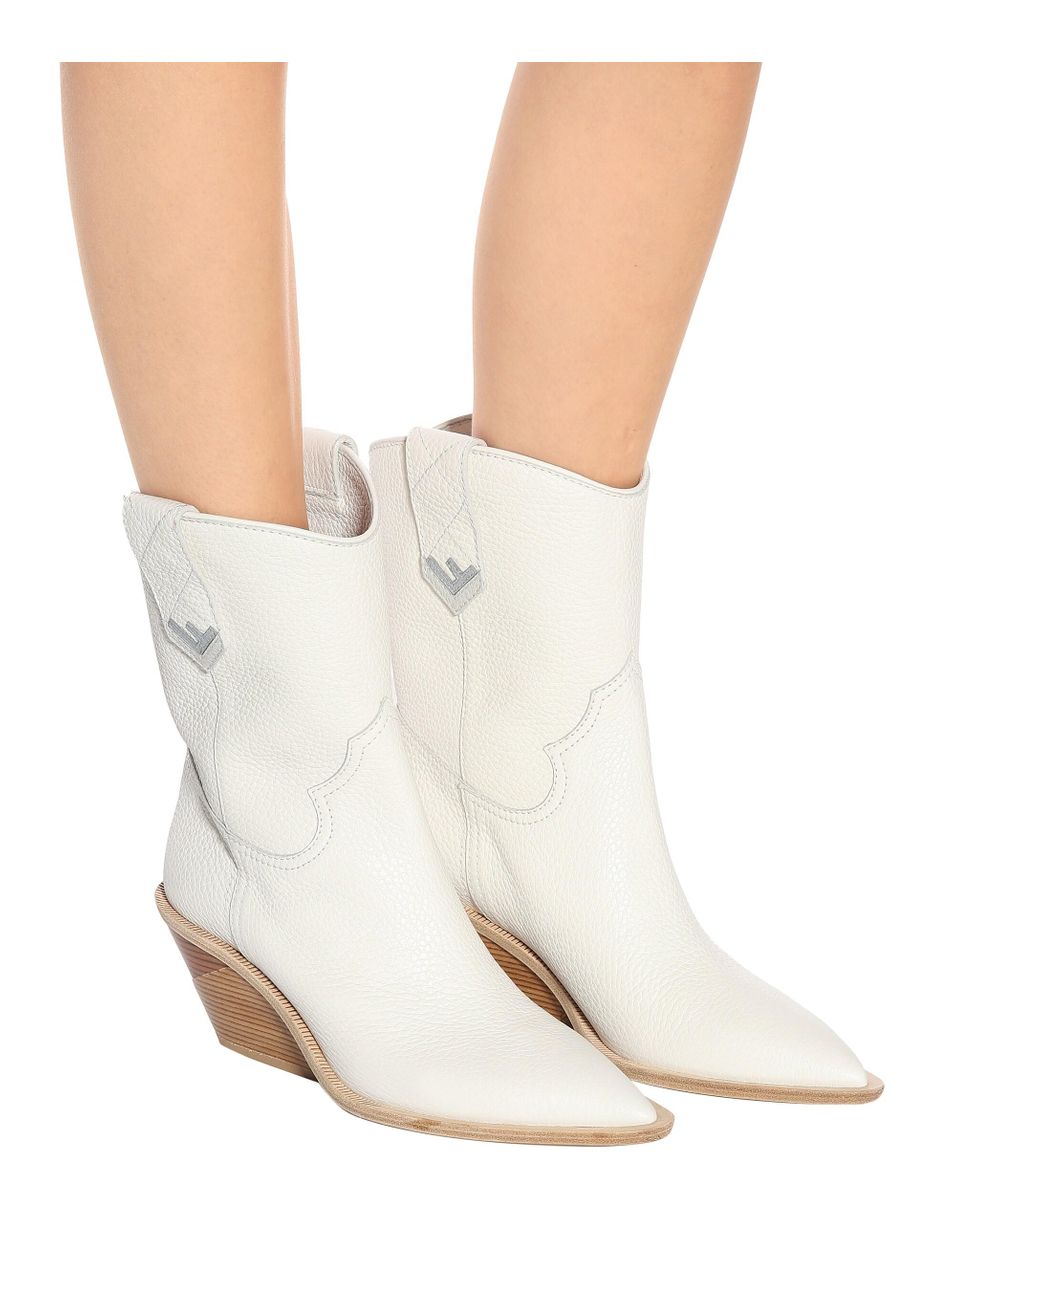 Fendi Leather Cowboy Boots in White | Lyst